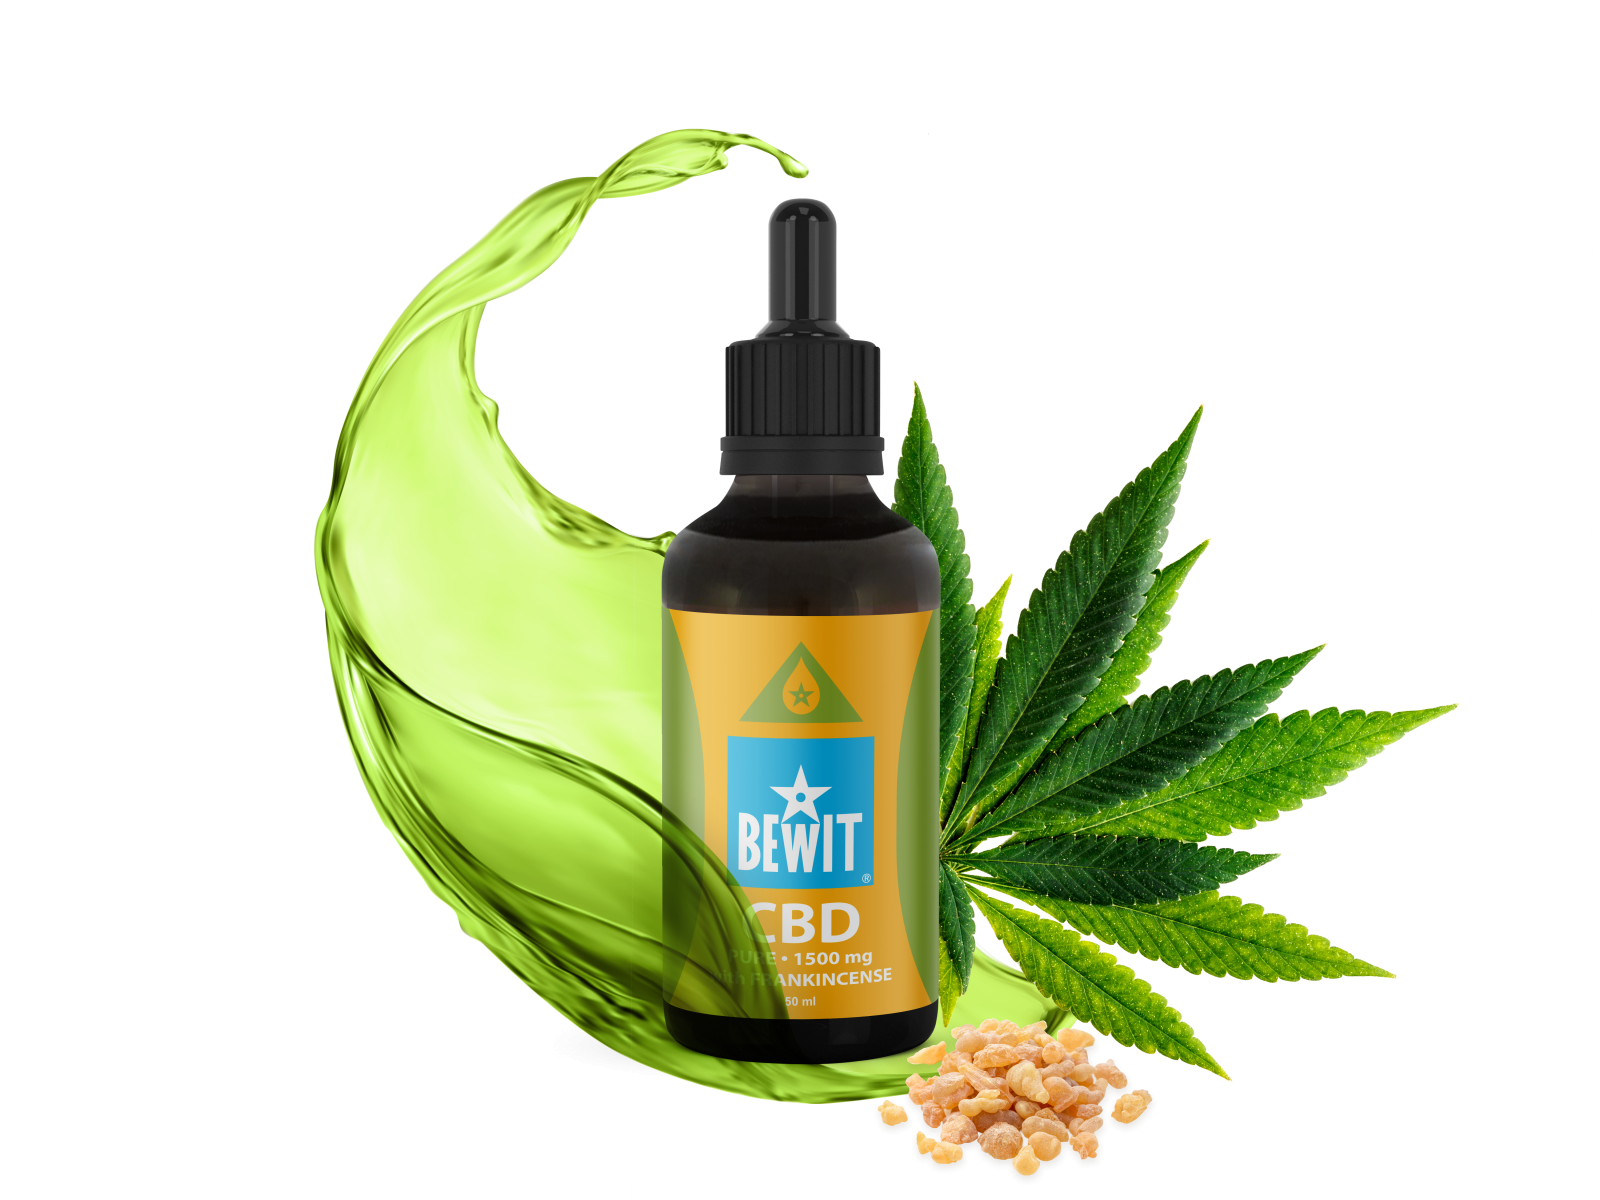 BEWIT CBD PURE 1500 MG WITH FRANKINCENSE ESSENTIAL OIL - Bewit.love